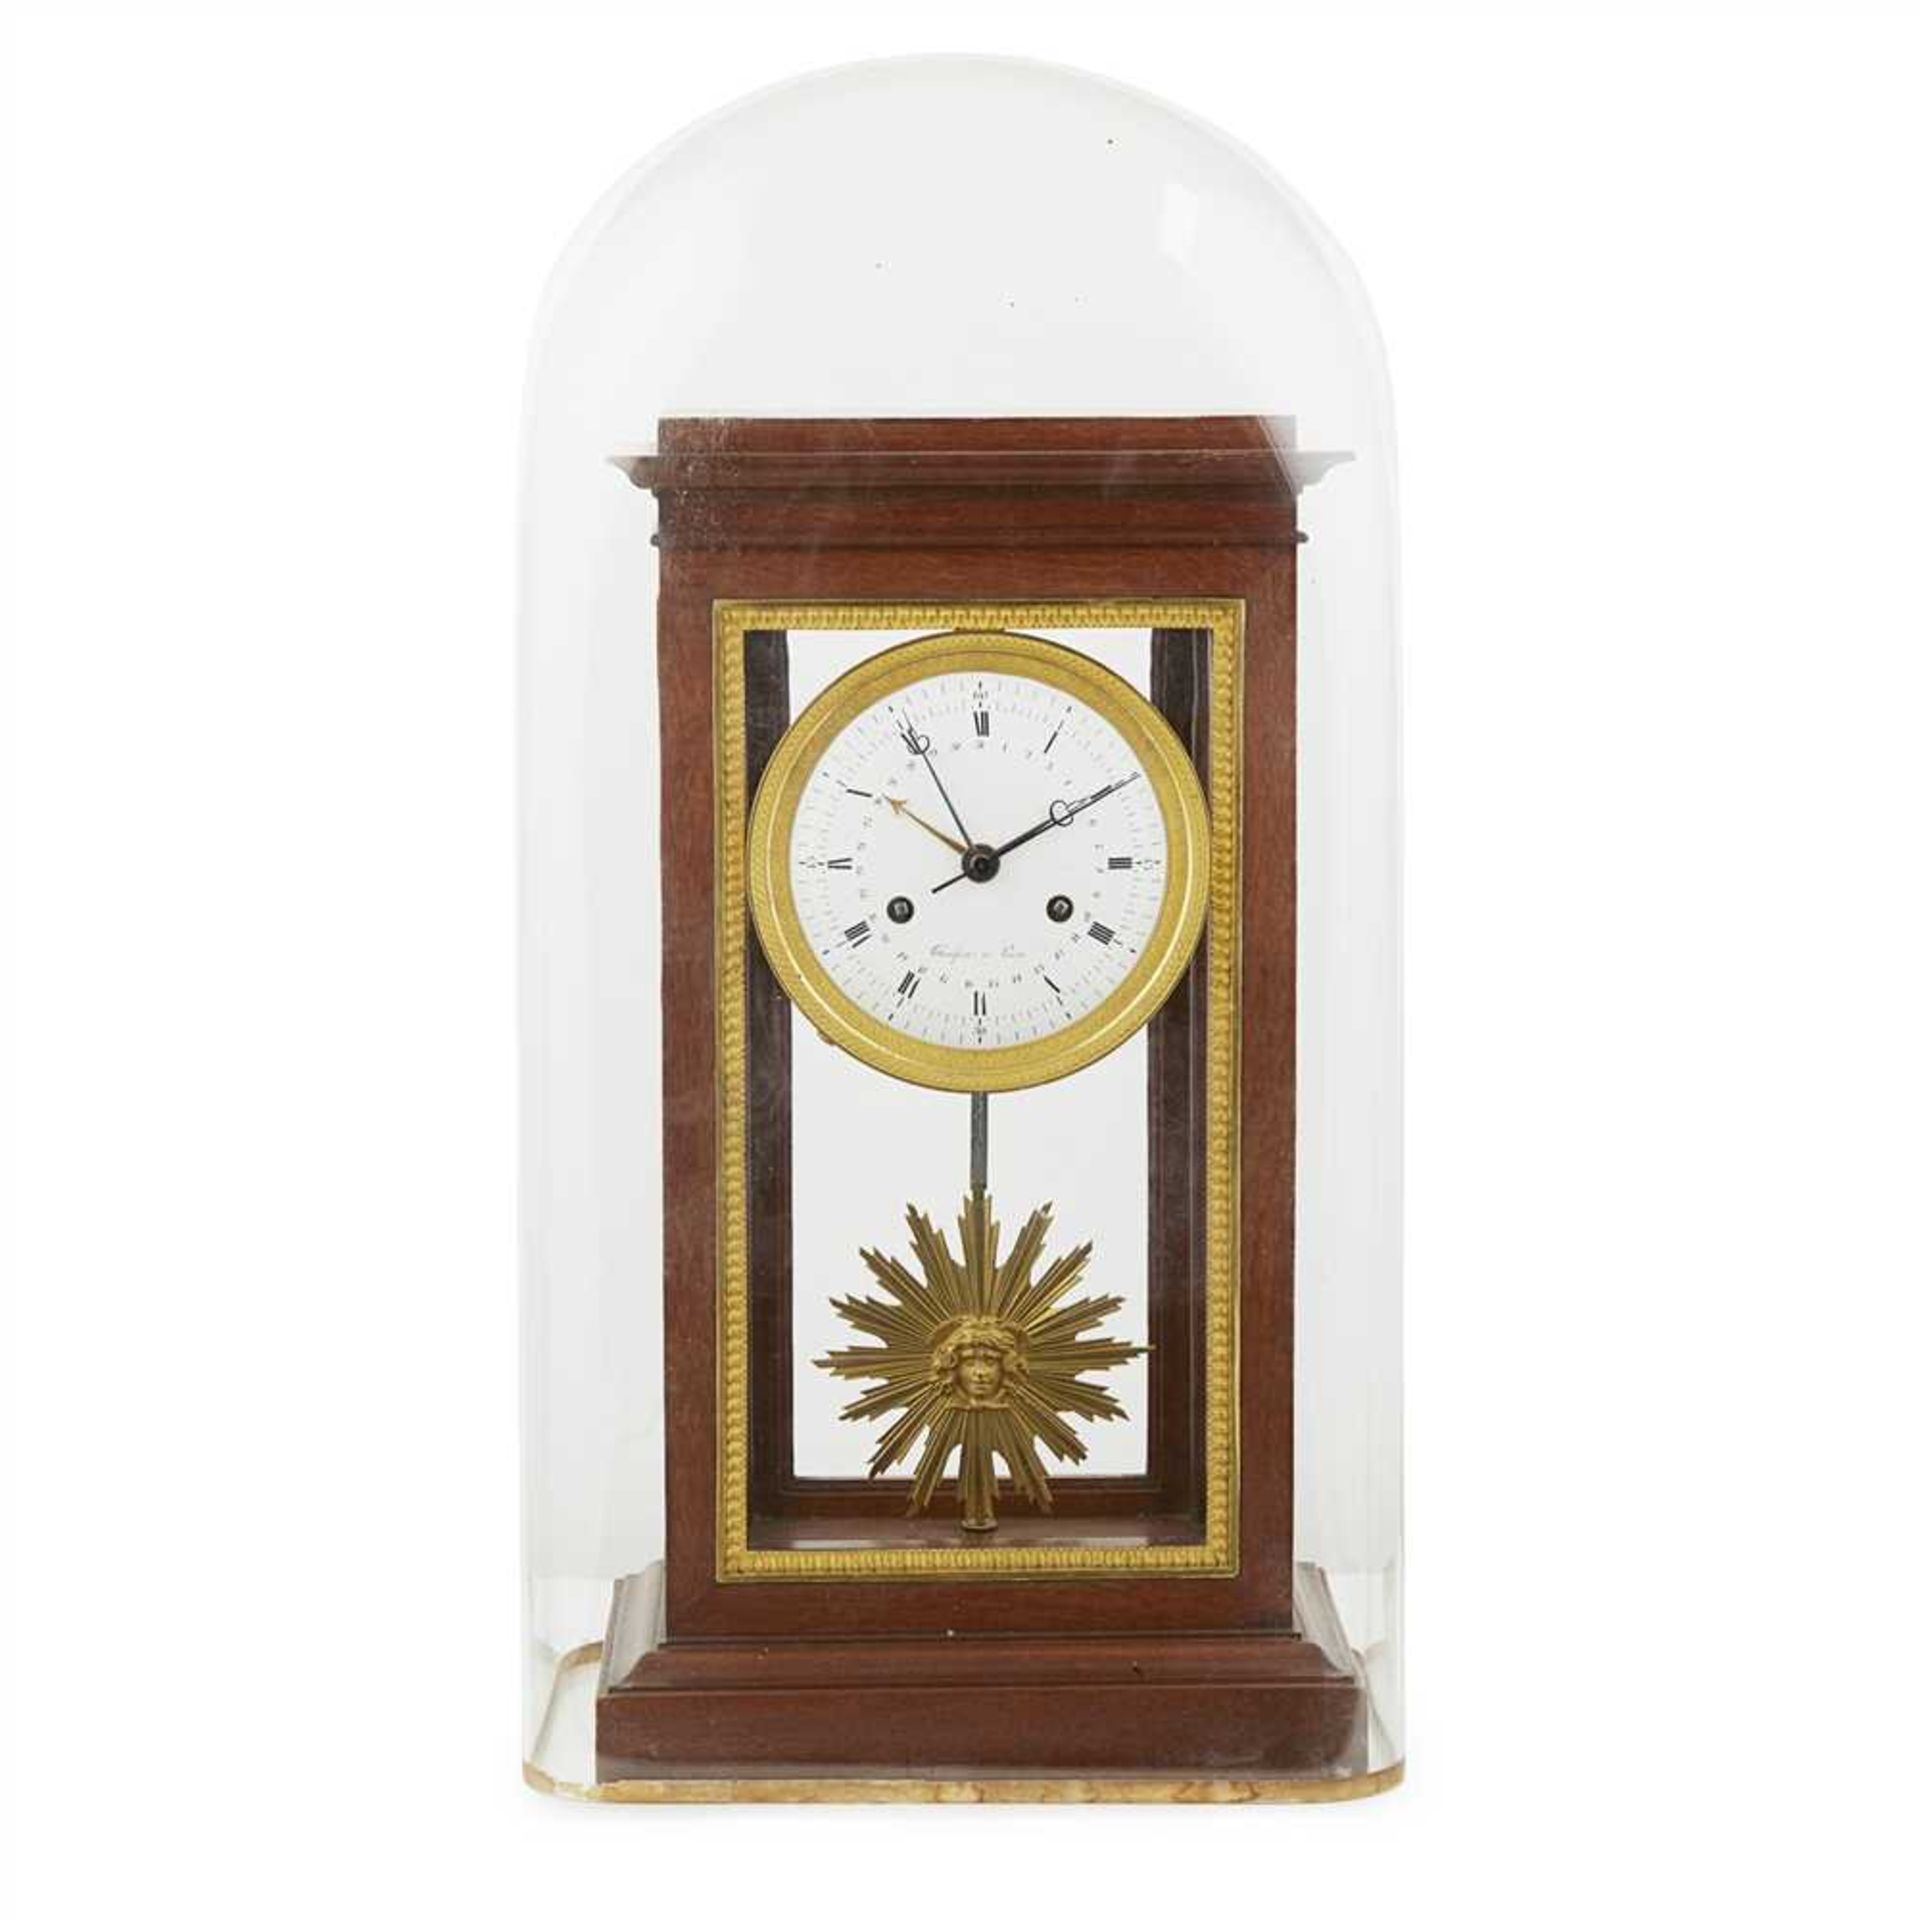 FRENCH EMPIRE MAHOGANY AND GILT METAL PORTICO CLOCK, THONISSEN, PARIS EARLY 19TH CENTURY - Image 5 of 5